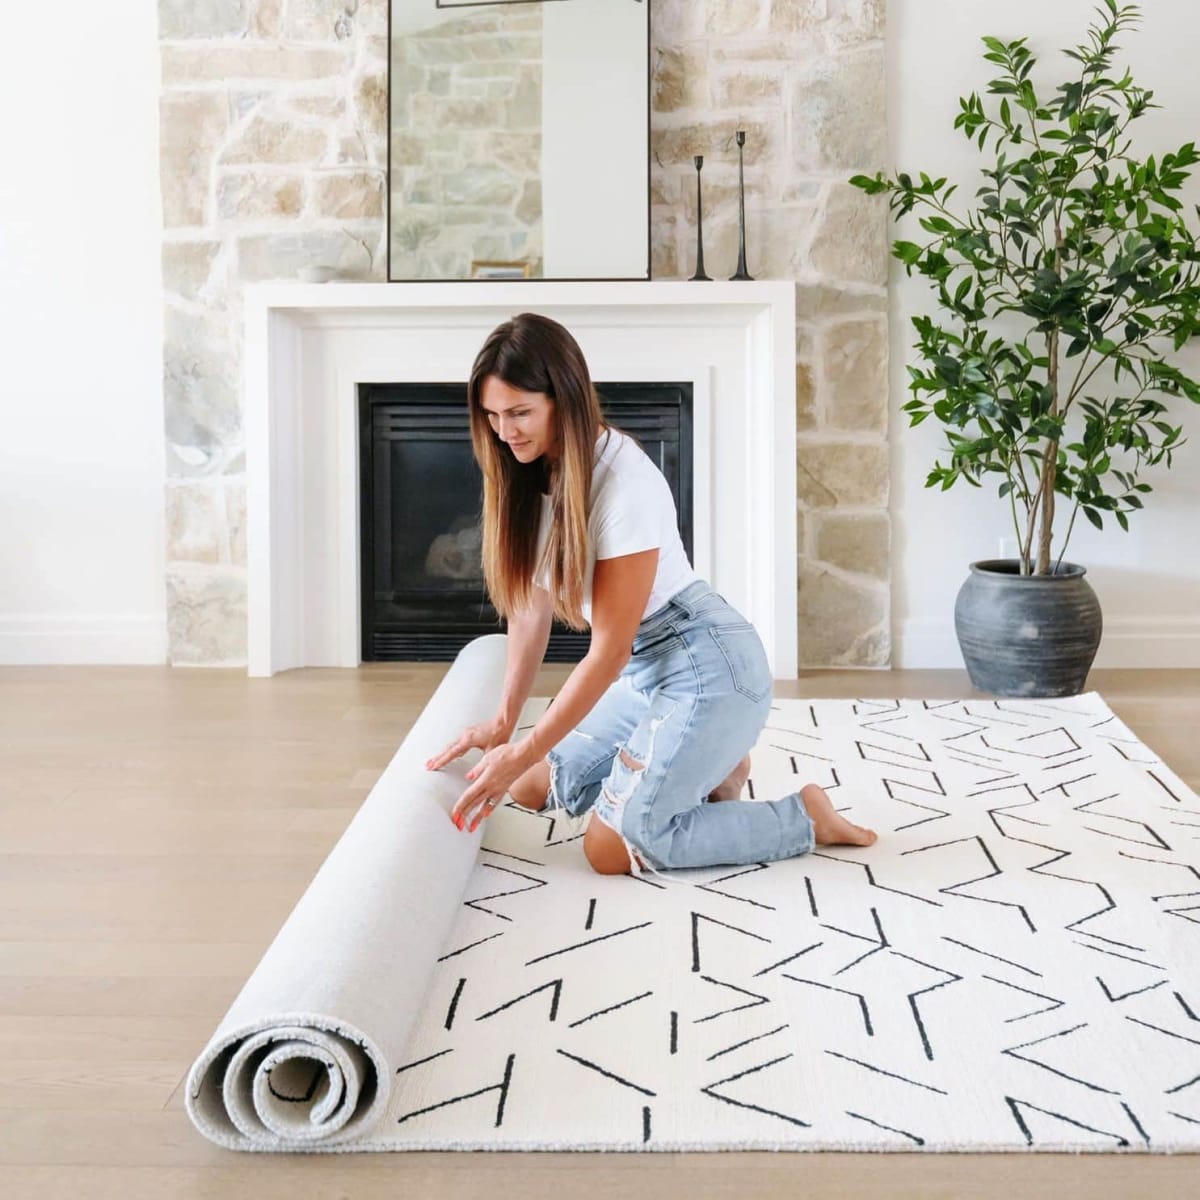 5 Best Rug Materials For High Traffic Areas